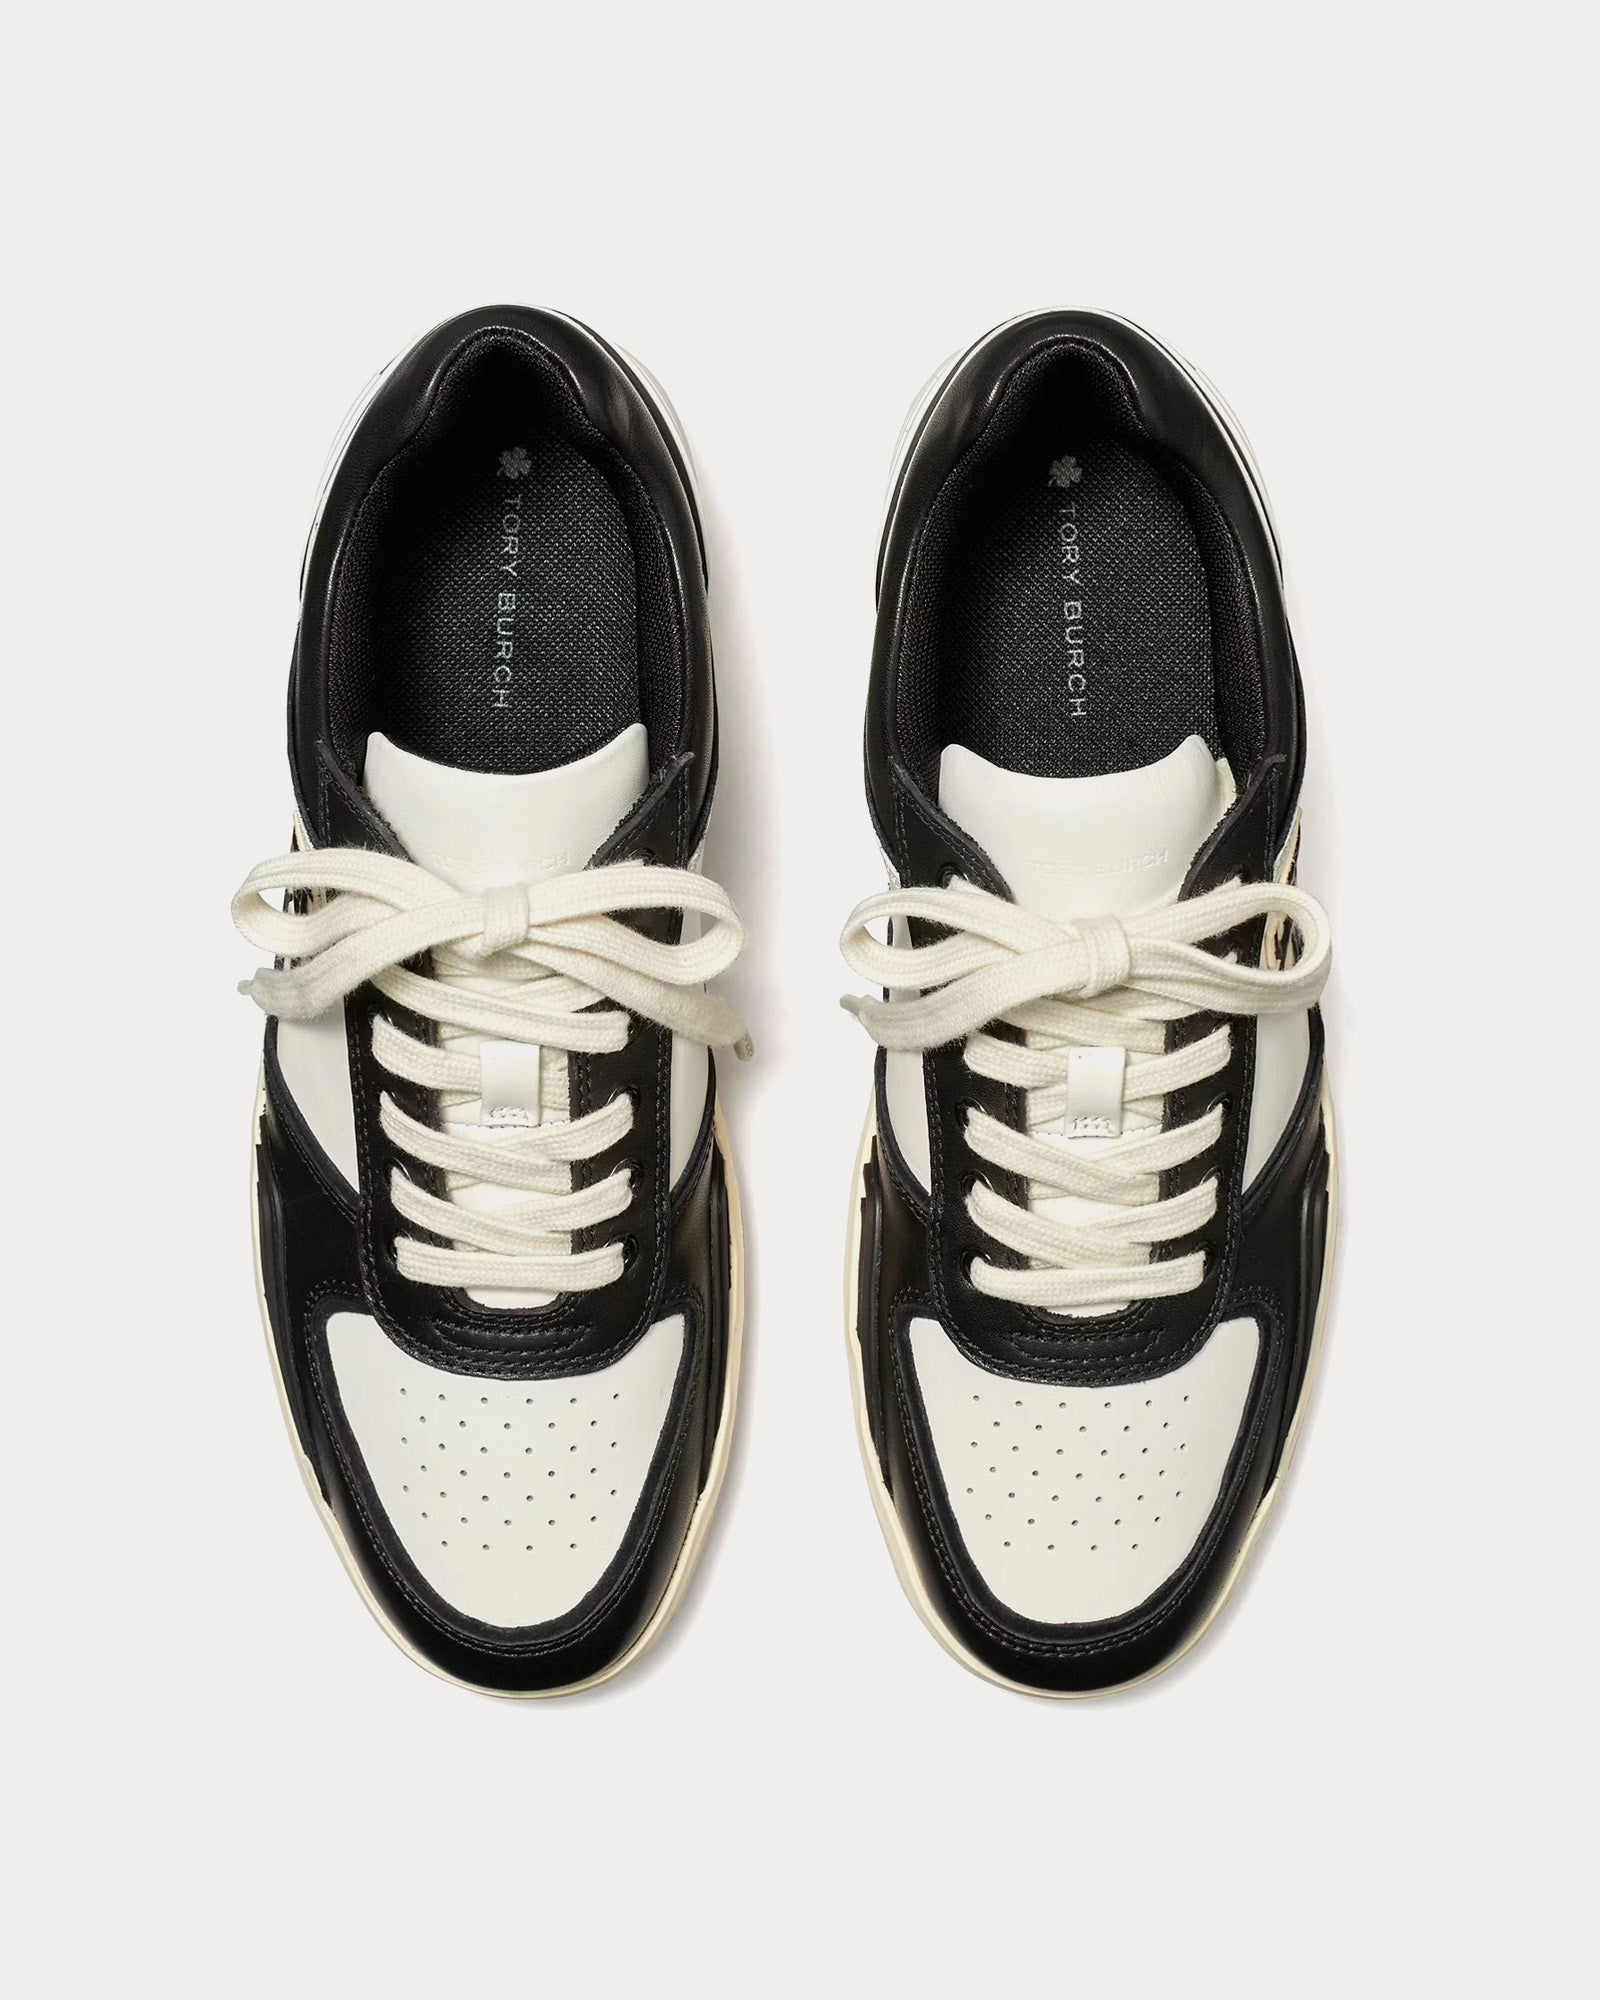 Tory Burch - Clover Court Purity / Perfect Black Low Top Sneakers